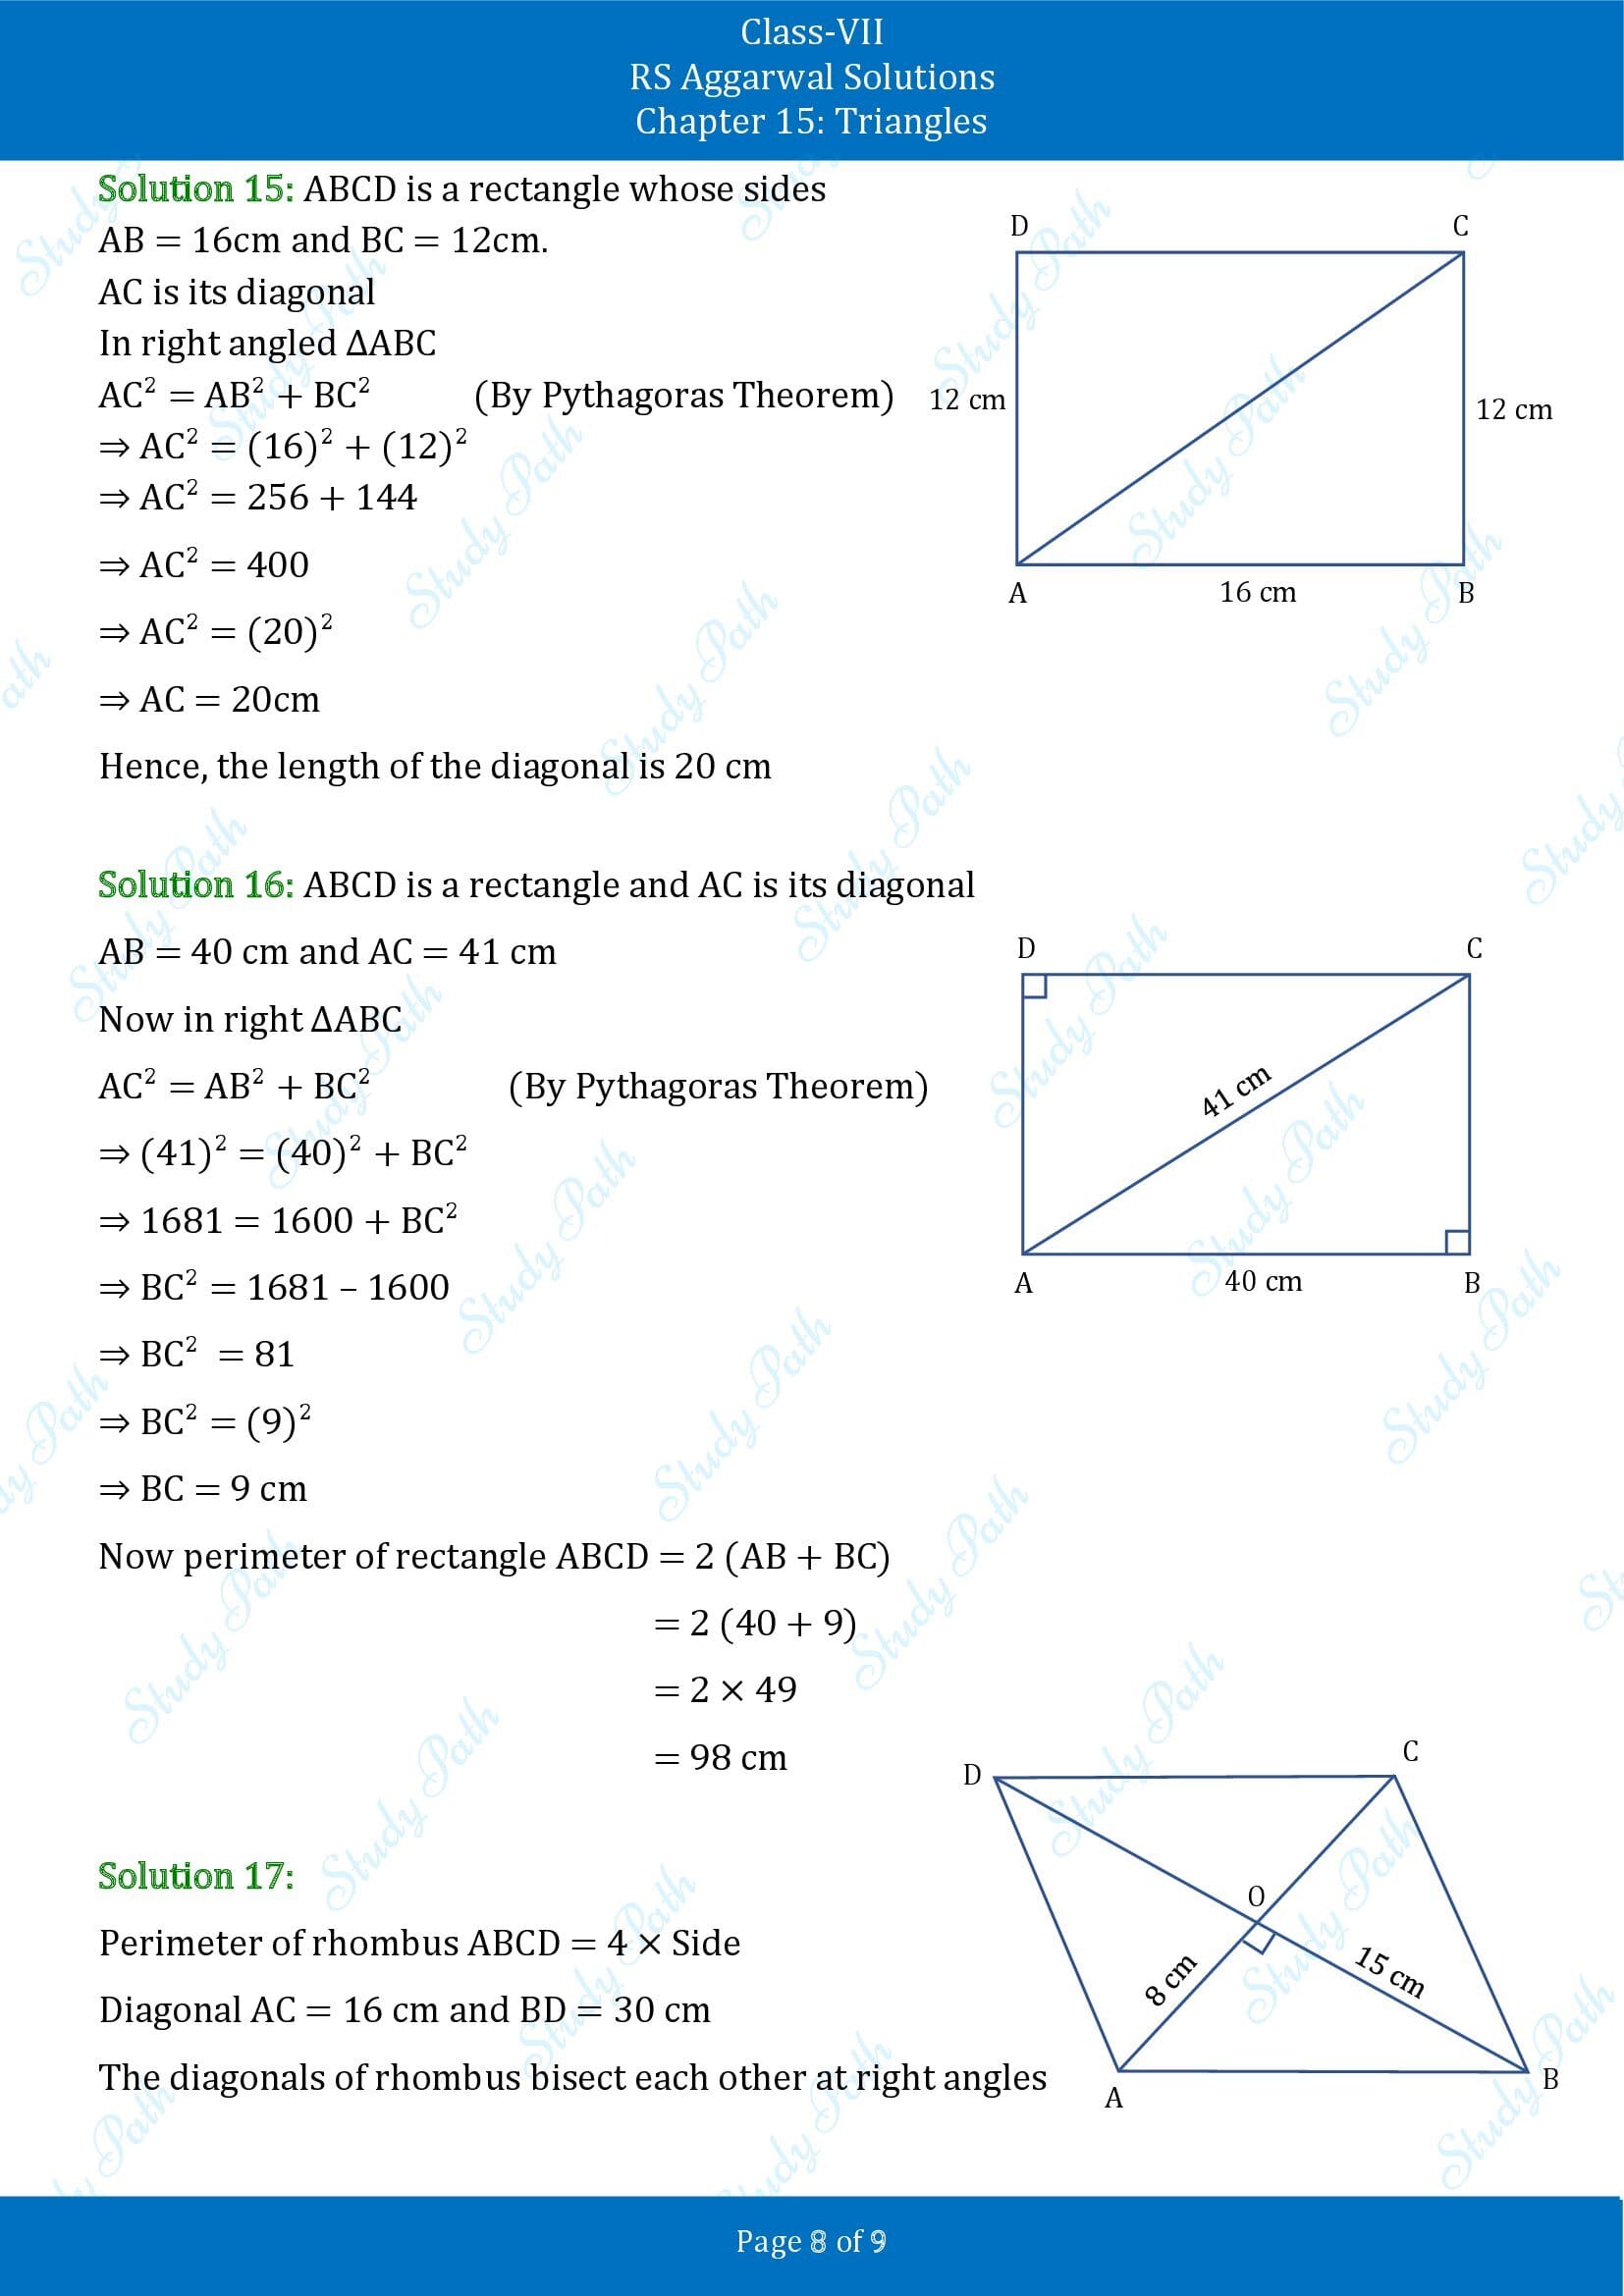 RS Aggarwal Solutions Class 7 Chapter 15 Triangles Exercise 15D 00008